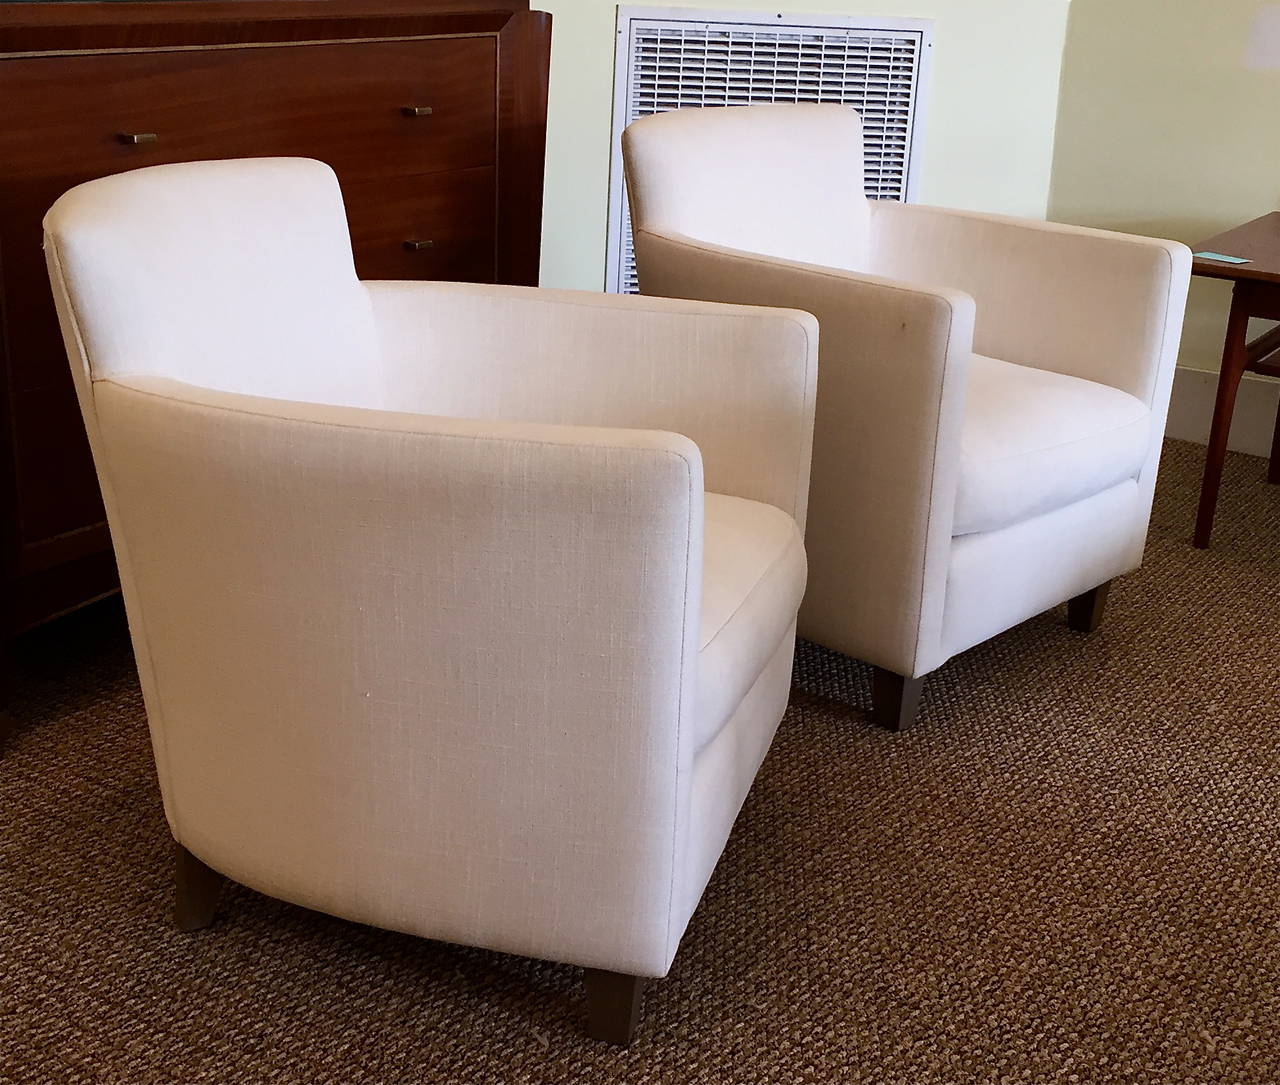 These Art Deco style club chairs have a compact footprint but are wonderfully comfortable. Inspired by 1940s French deco masters, such as Dominique, they are upholstered in linen and ready to accept another fabric or be enjoyed as is.